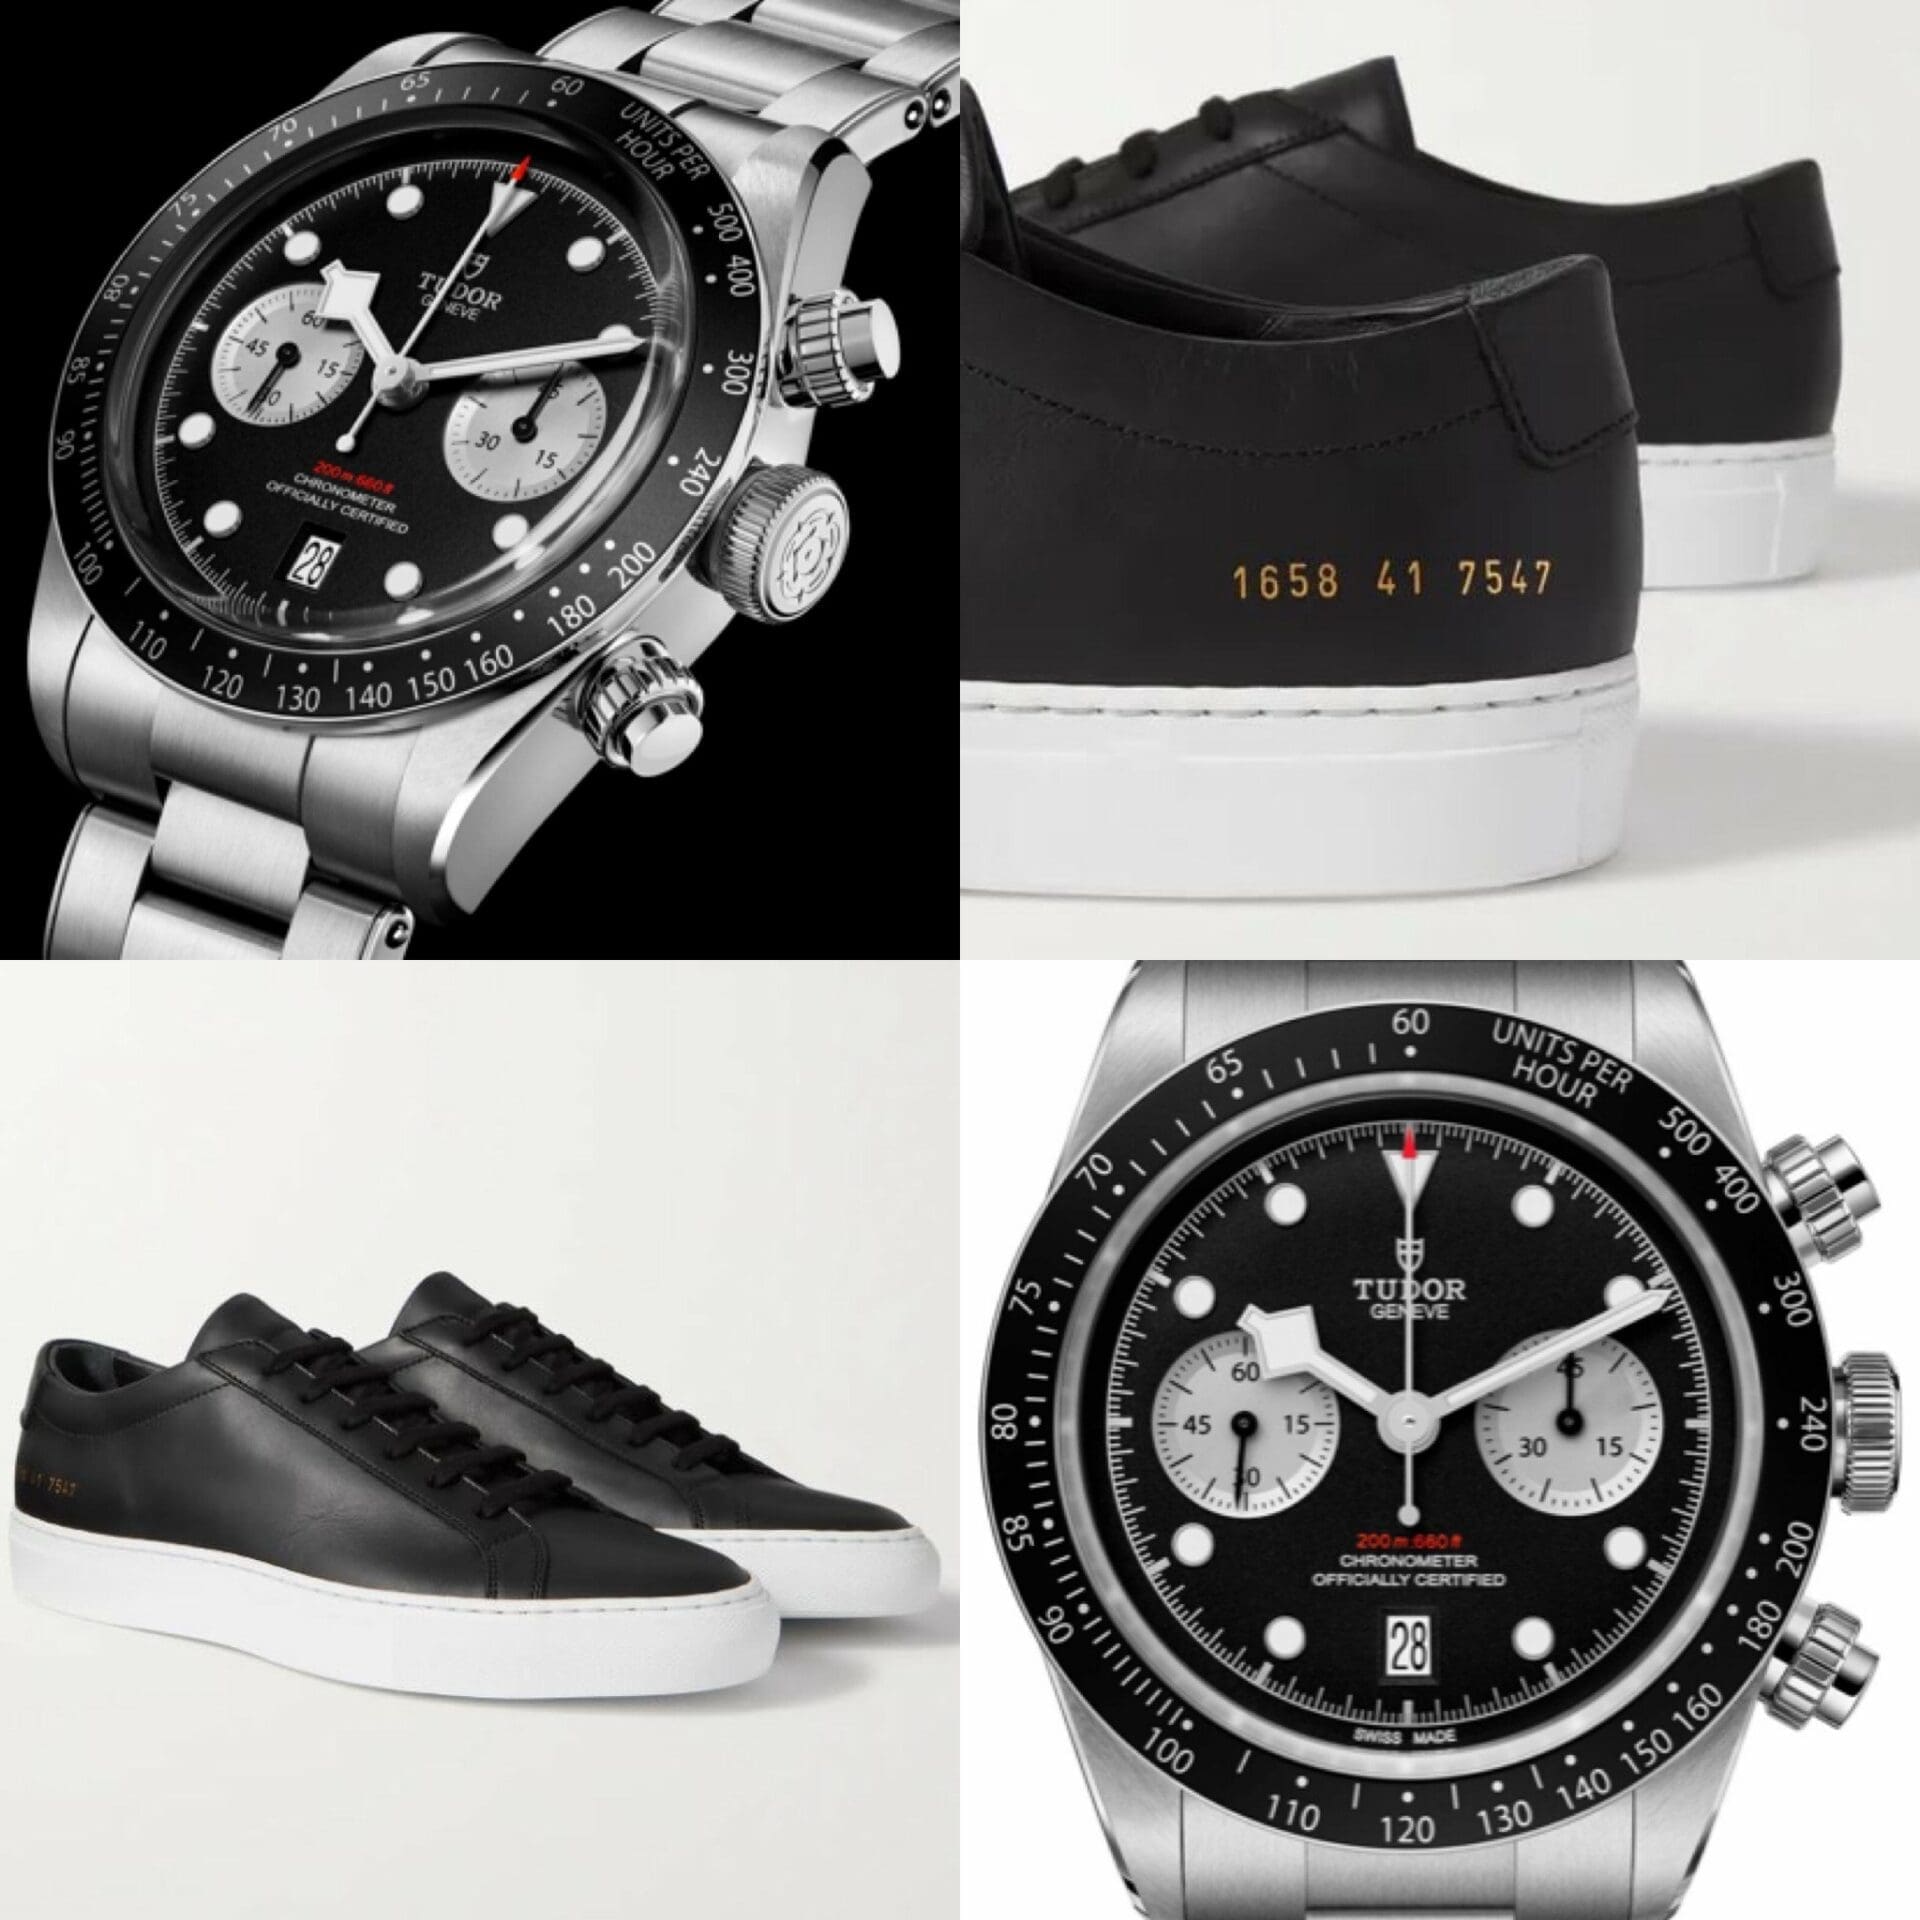 #Kixntix: The toughness of the Tudor Black Bay Chronograph meets the minimalist luxury of Common Projects